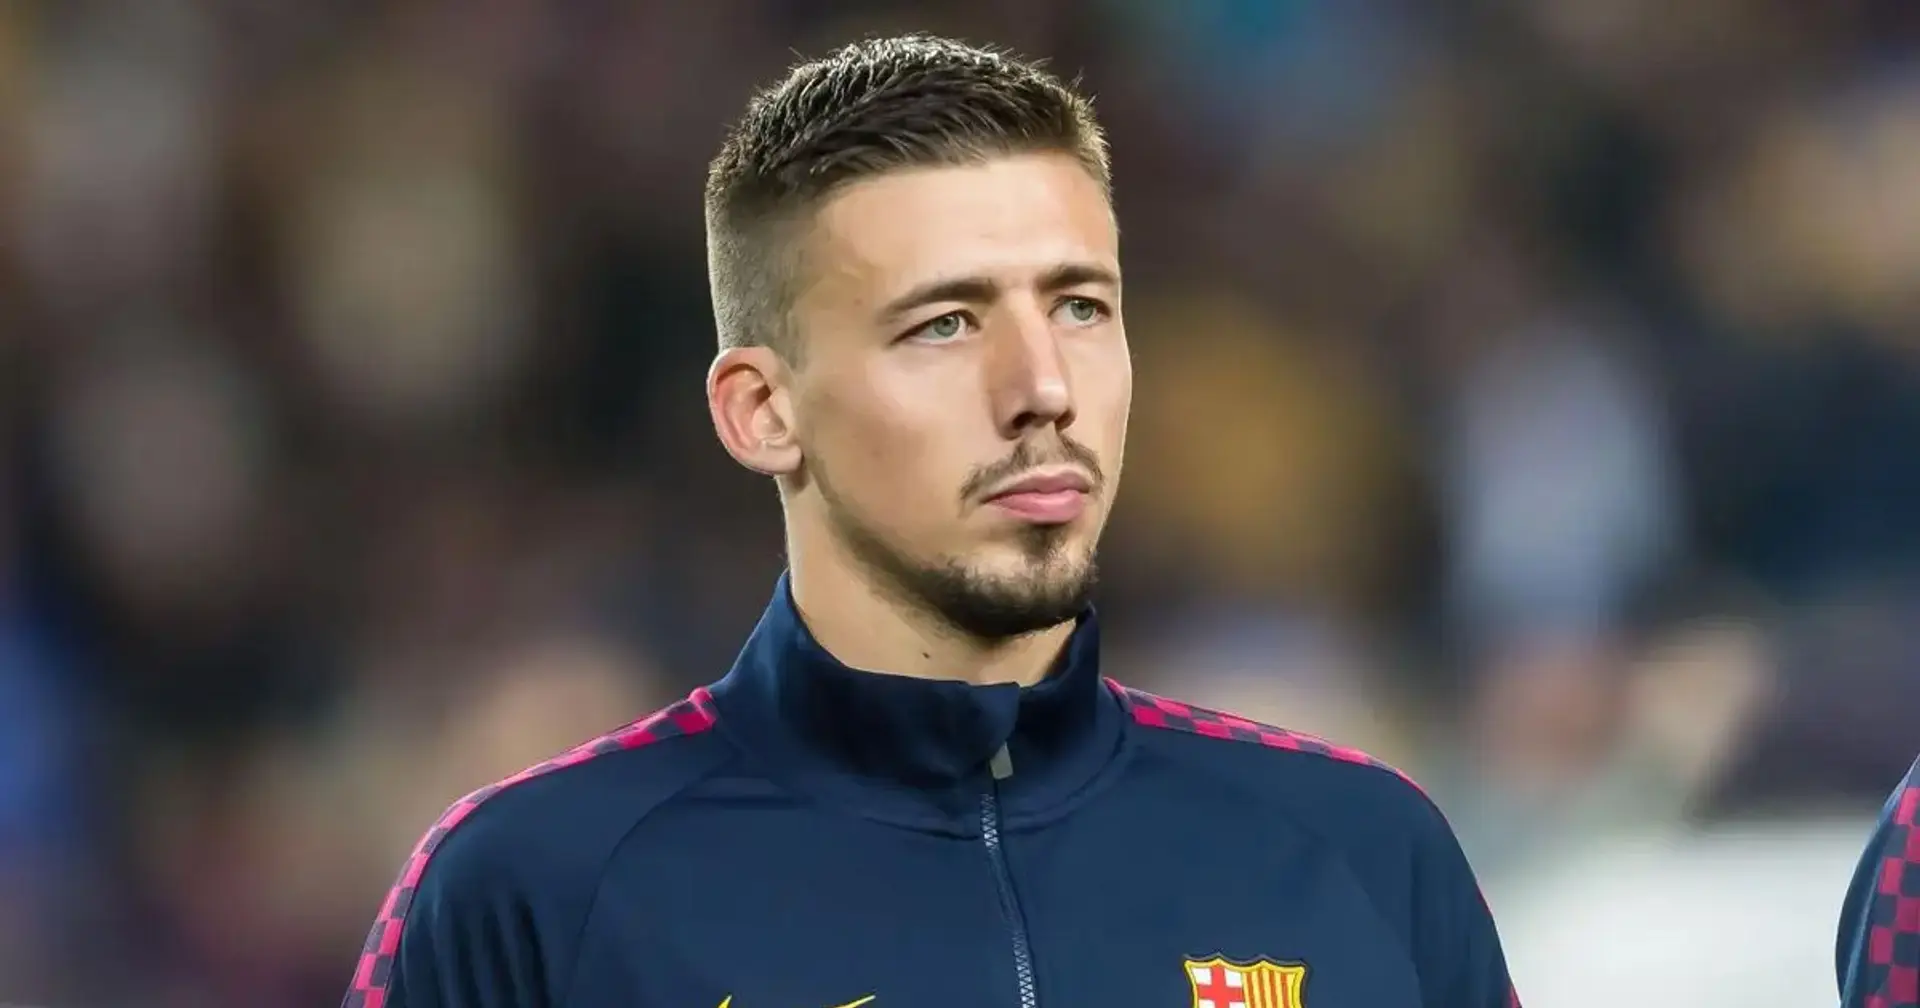 Barca put Lenglet on the market for January (reliability: 4 stars)